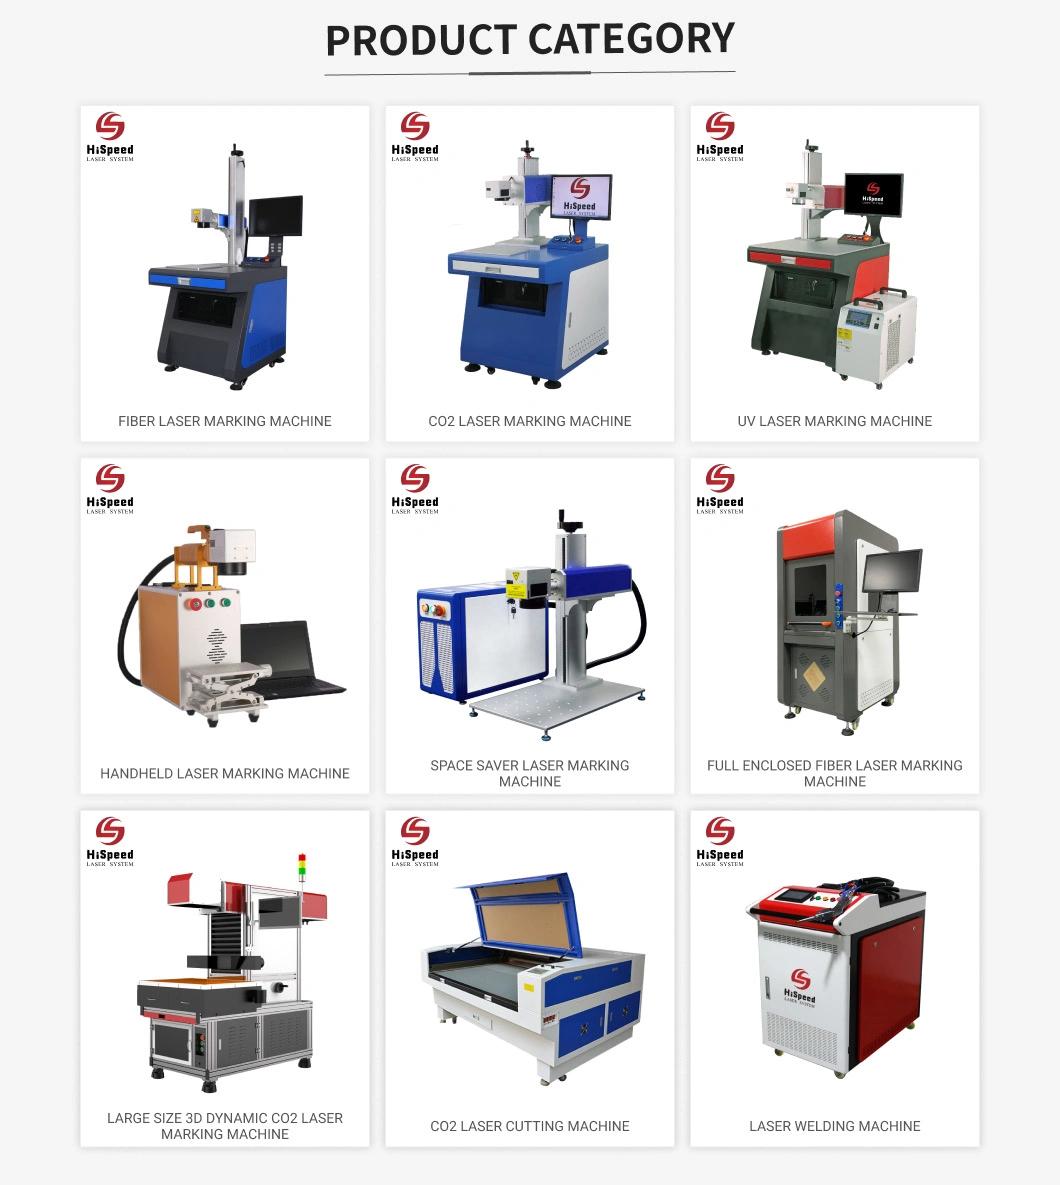 50W /100W CO2 Laser Engraver Laser Marking Machine for Wood Leather and Paper Glass Bottle